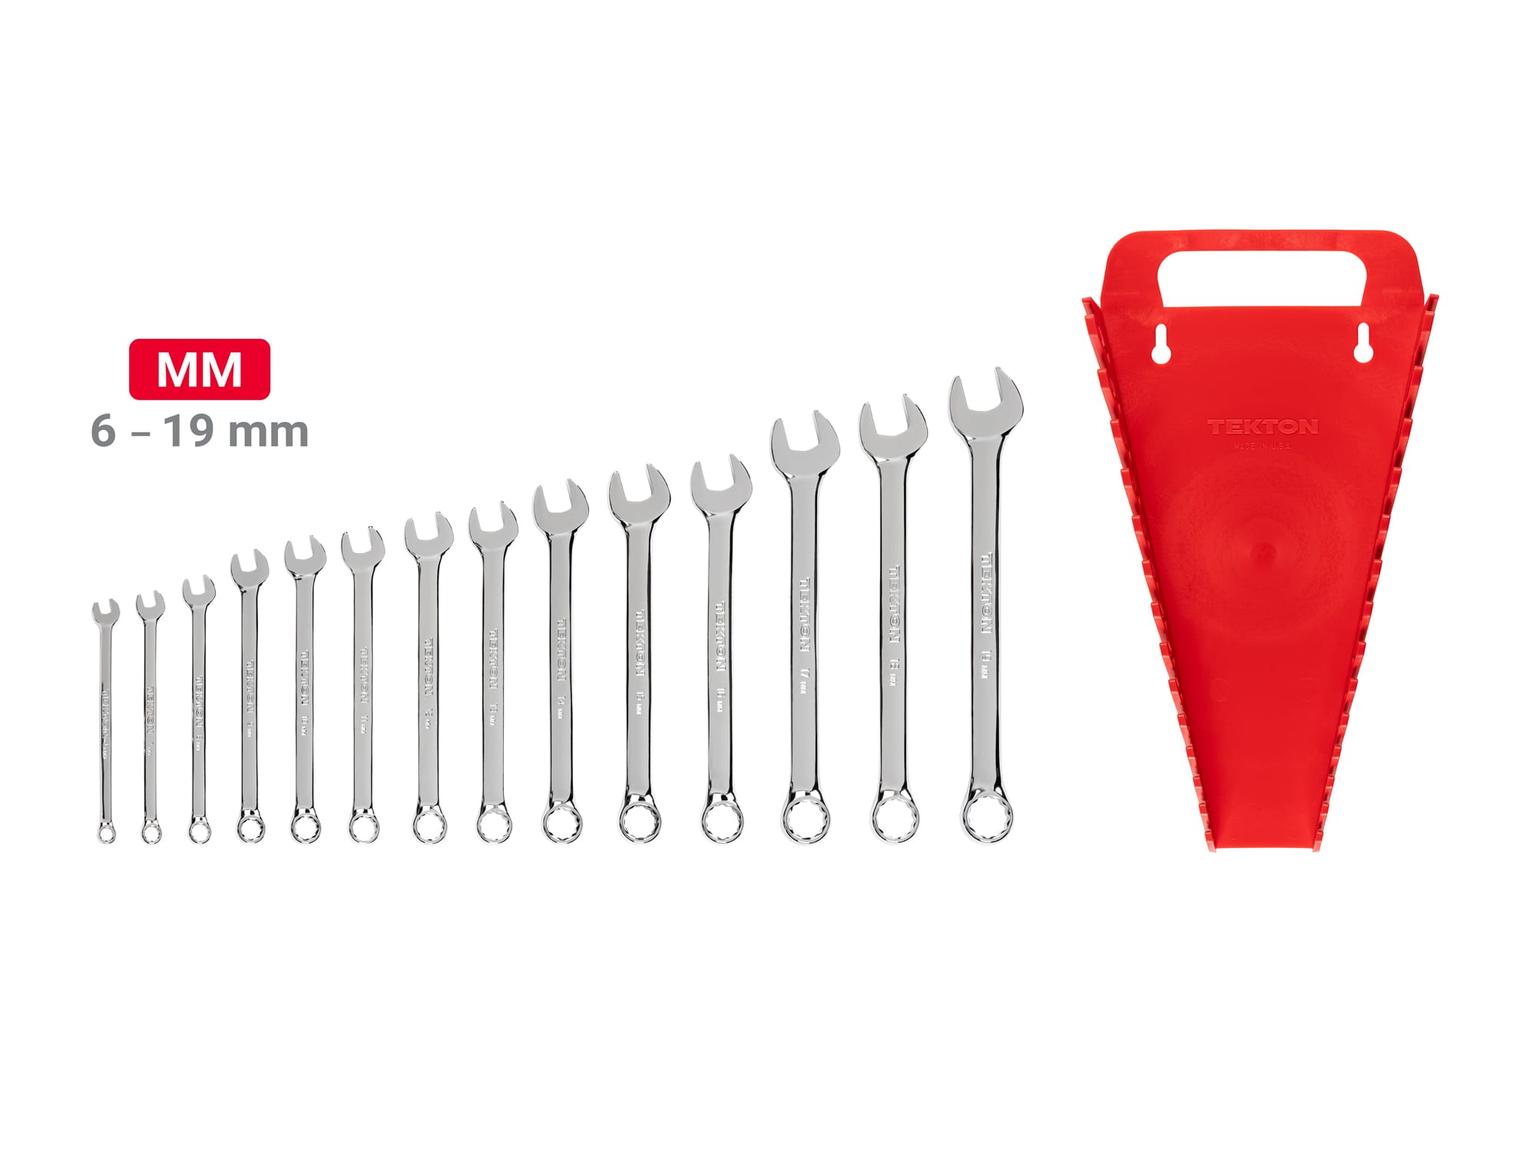 TEKTON WCB92201-T Combination Wrench Set with Holder, 14-Piece (6 - 19 mm)